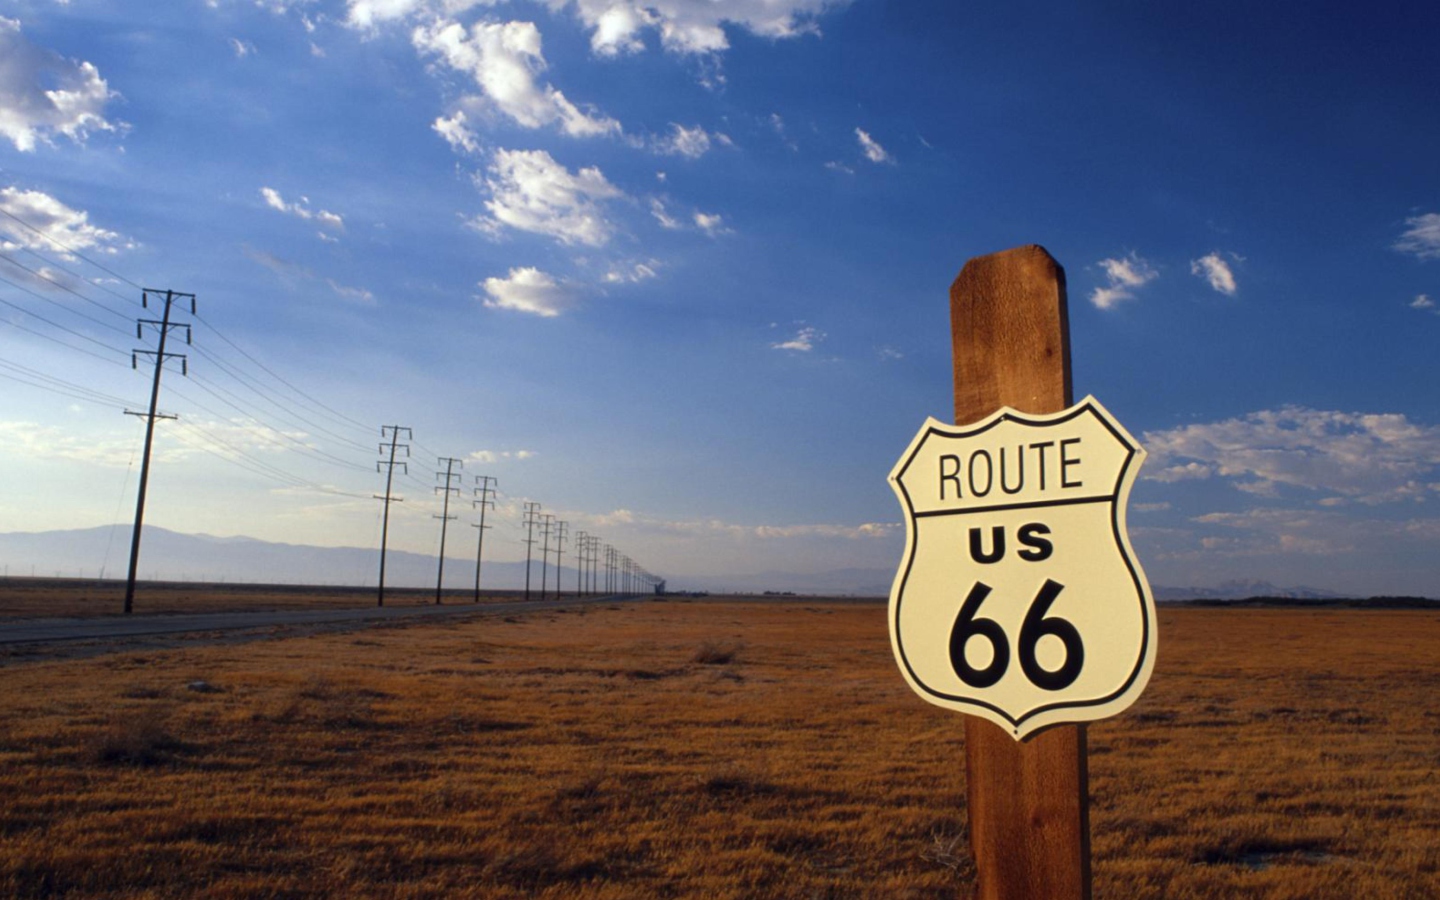 America's Most Famous Route 66 wallpaper 1440x900